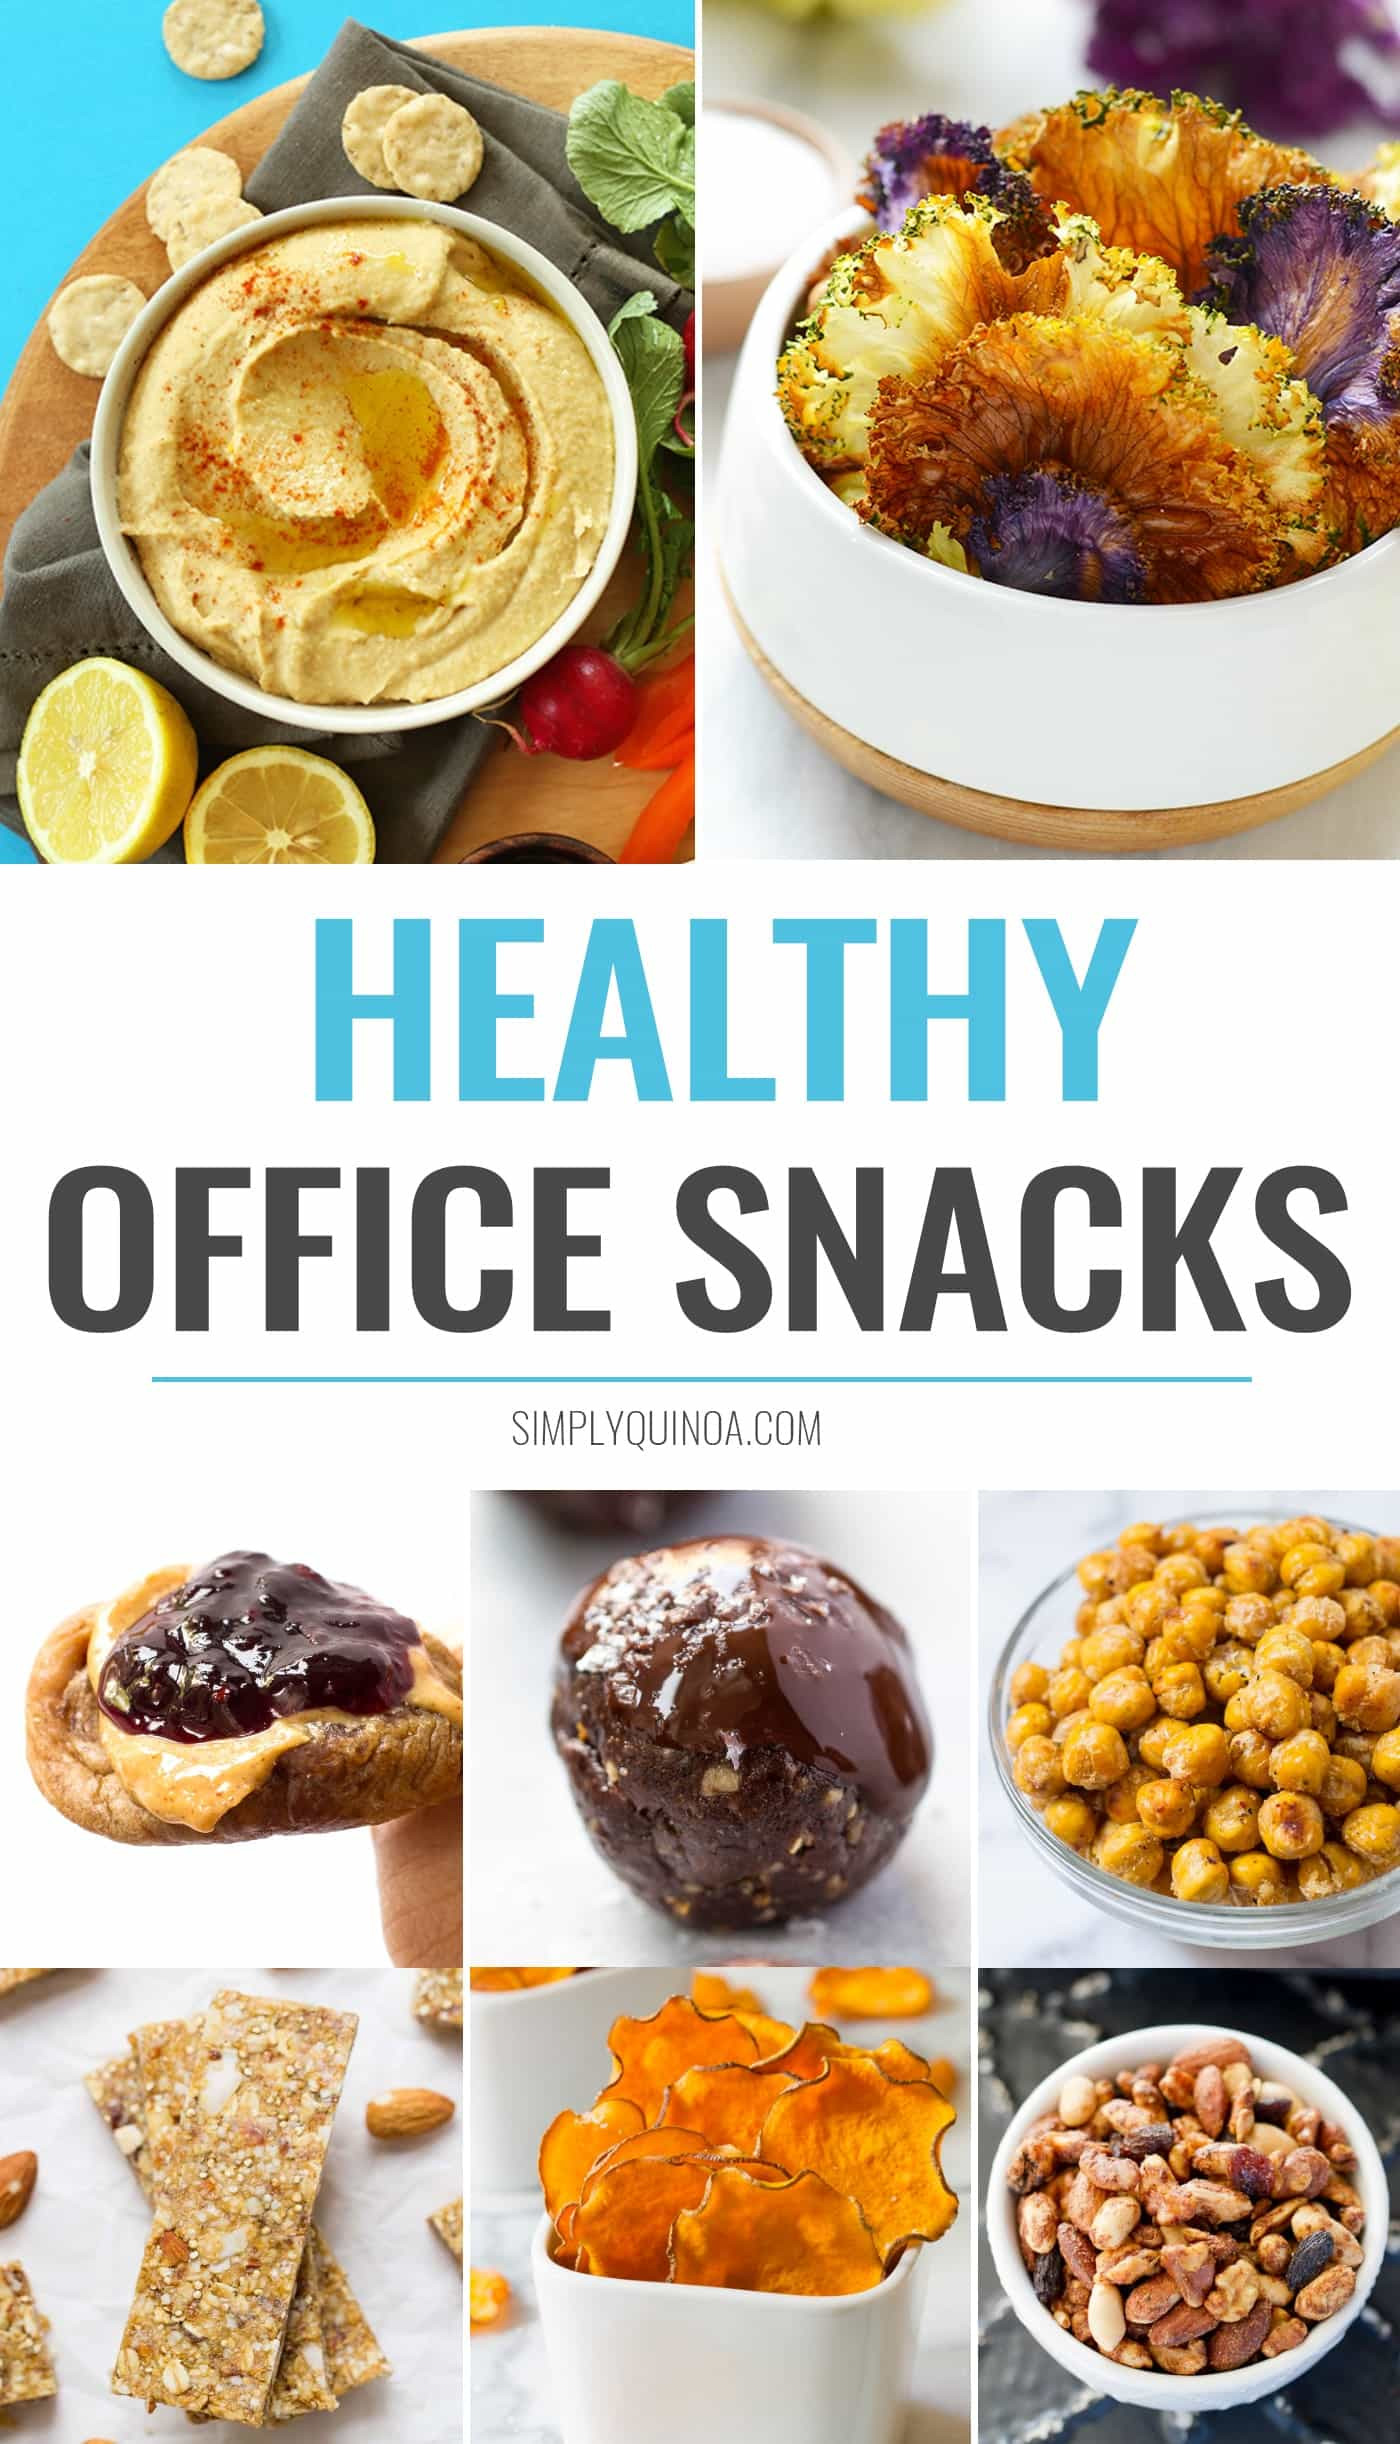 Healthy Snacks for Office 20 Best the 12 Best Healthy Fice Snacks Simply Quinoa